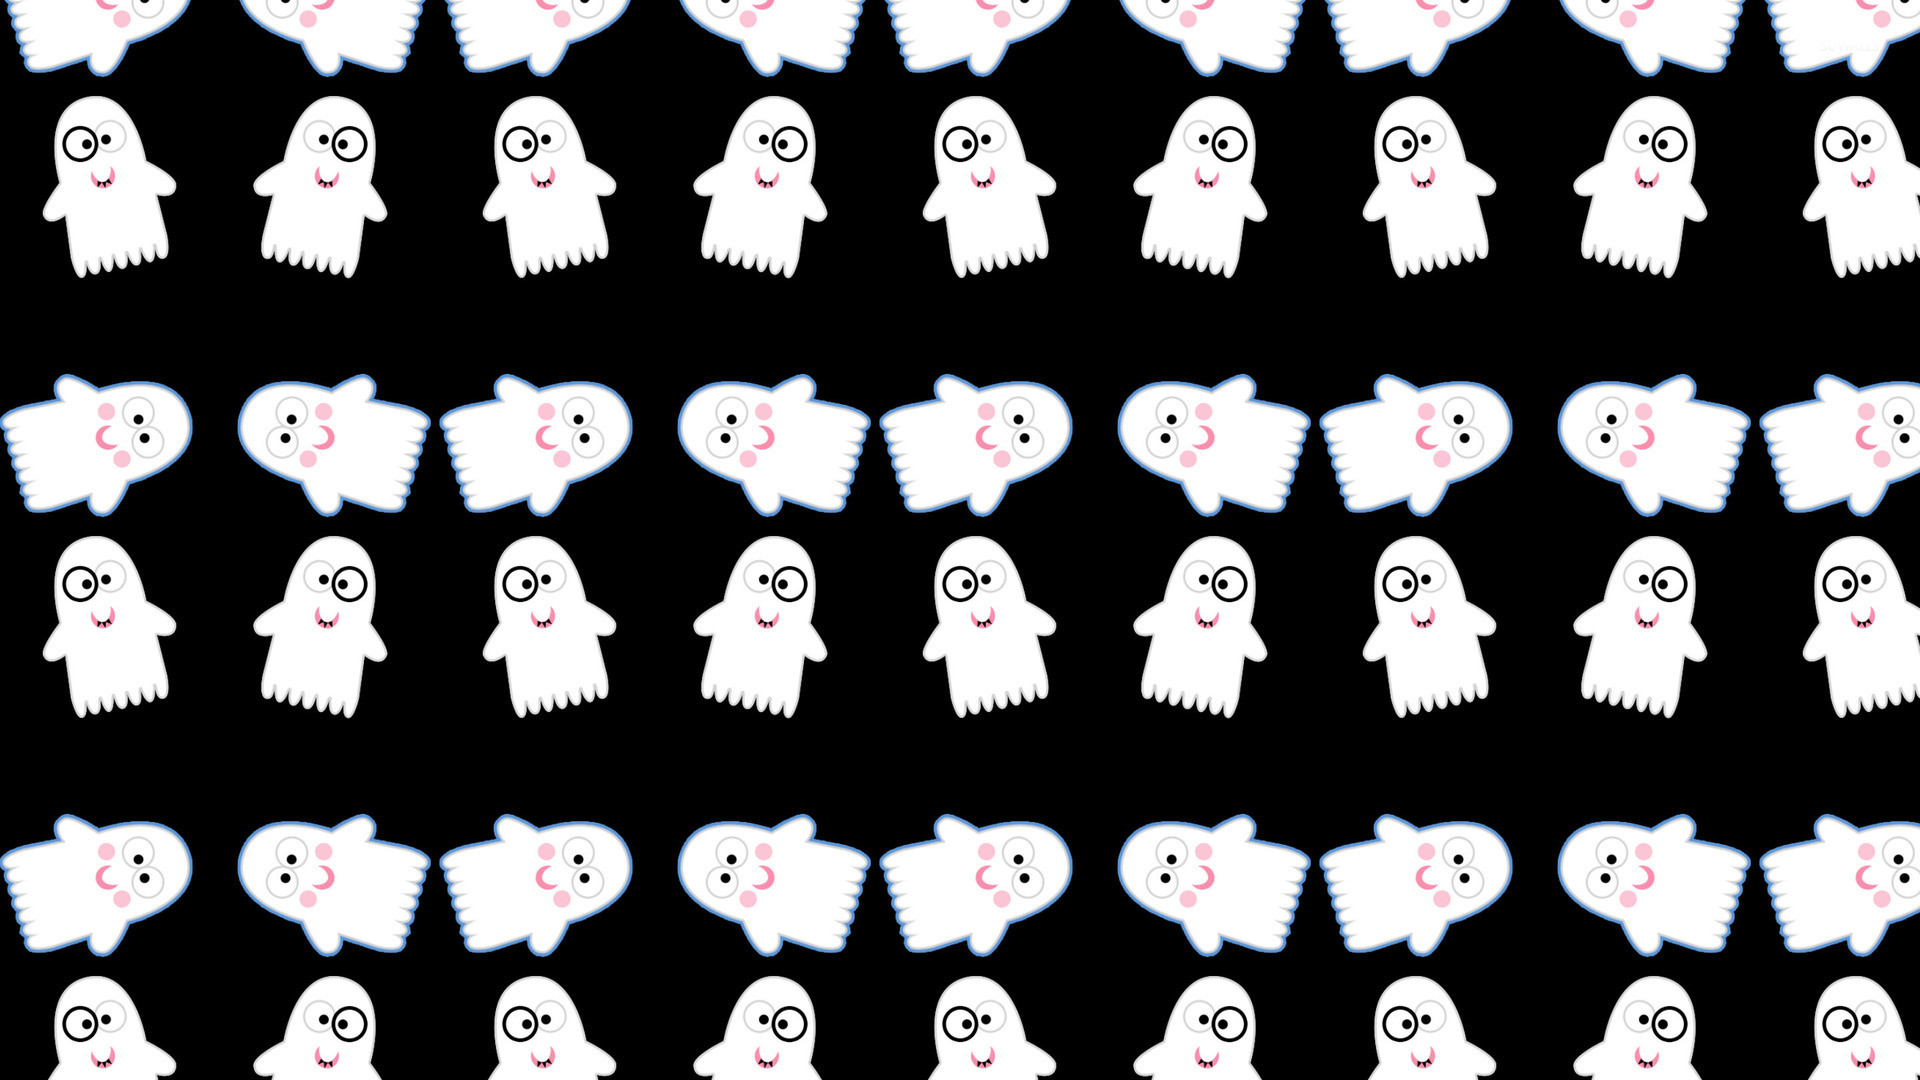 1920x1080 Cute ghost pattern wallpaper - Holiday wallpapers - #24315